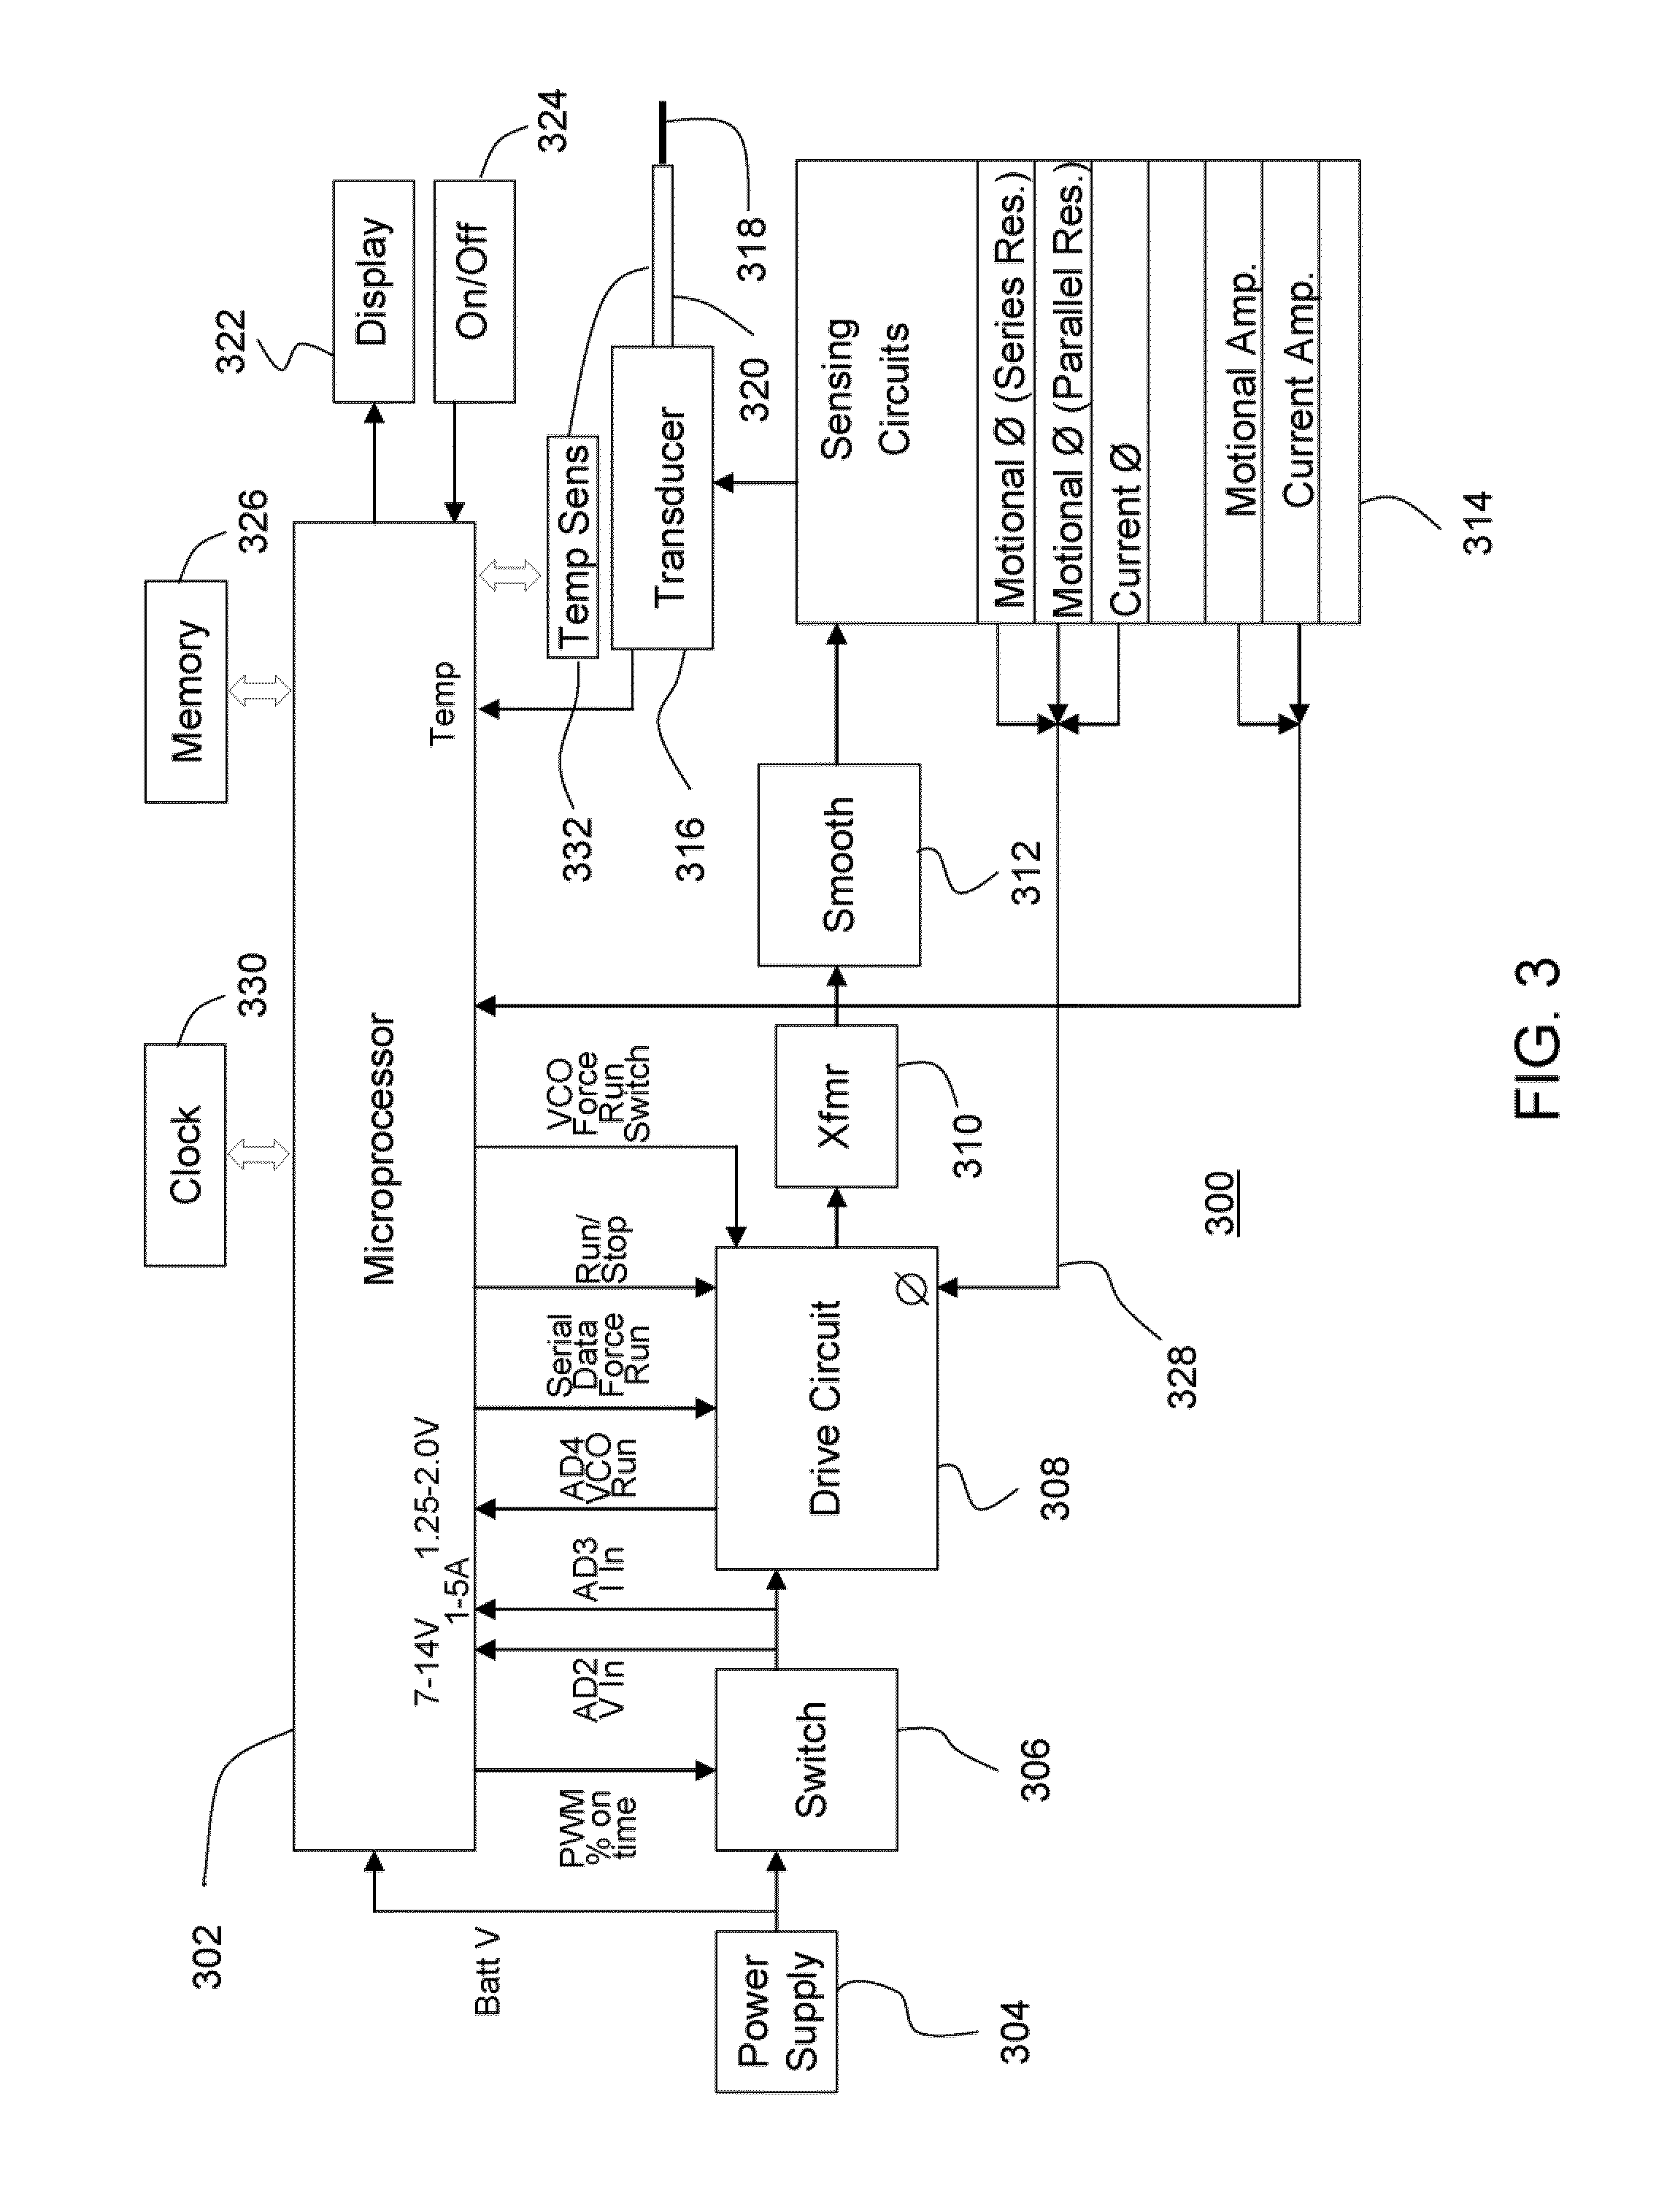 Battery assembly for battery-powered surgical instruments